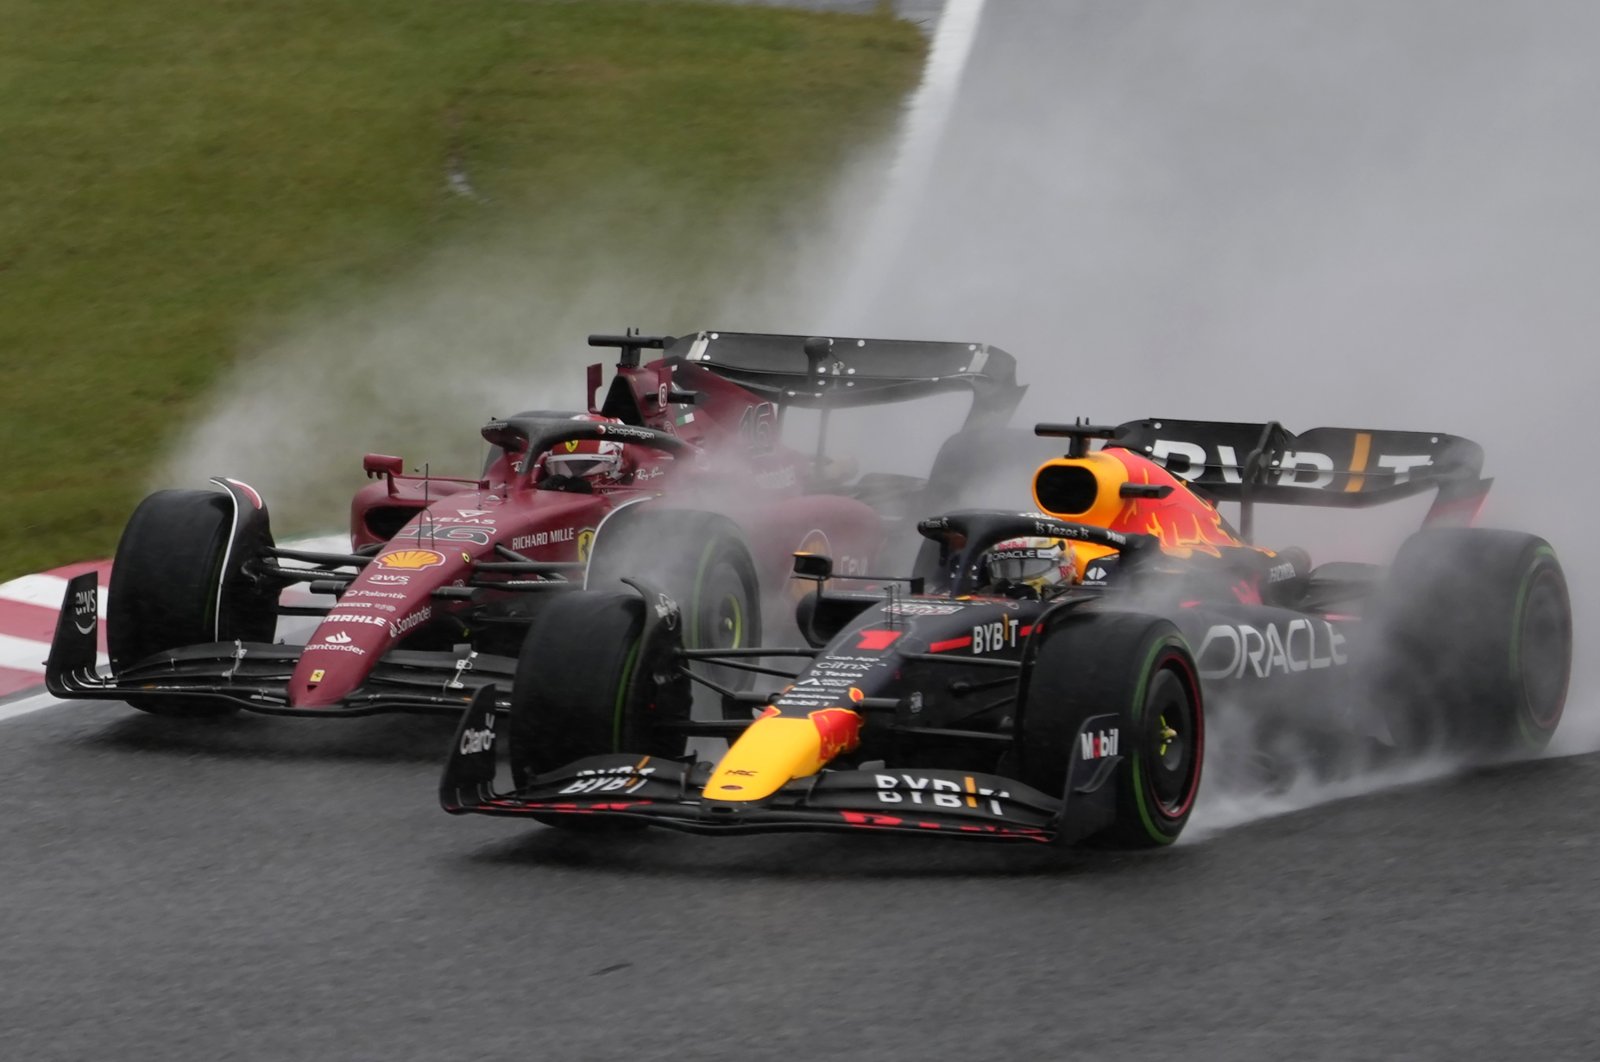 Red Bull driver Max Verstappen of the Netherlands (R) and Ferrari driver Charles Leclerc of Monaco compete during the Japanese Formula One Grand Prix at the Suzuka Circuit, Suzuka, Japan, Oct. 9, 2022. (AP Photo)